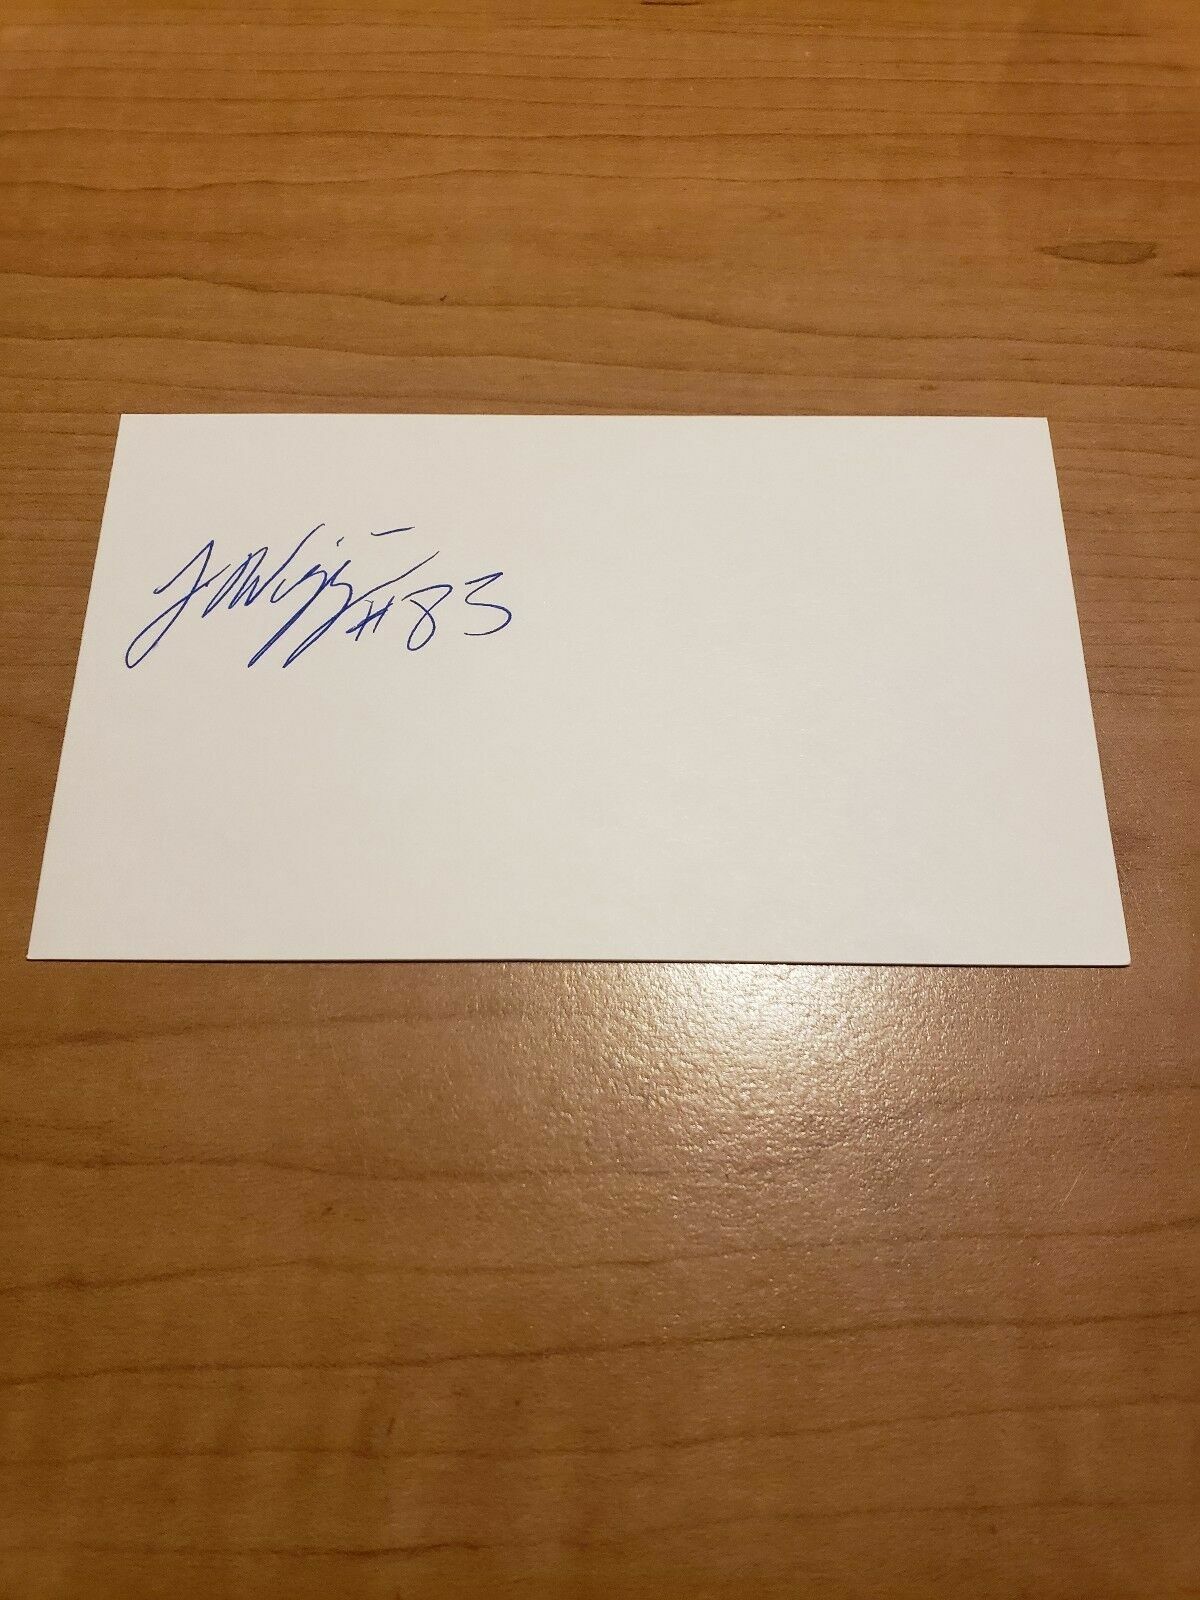 JERMAINE WIGGINS - FOOTBALL - AUTOGRAPH SIGNED - INDEX CARD -AUTHENTIC - A5348